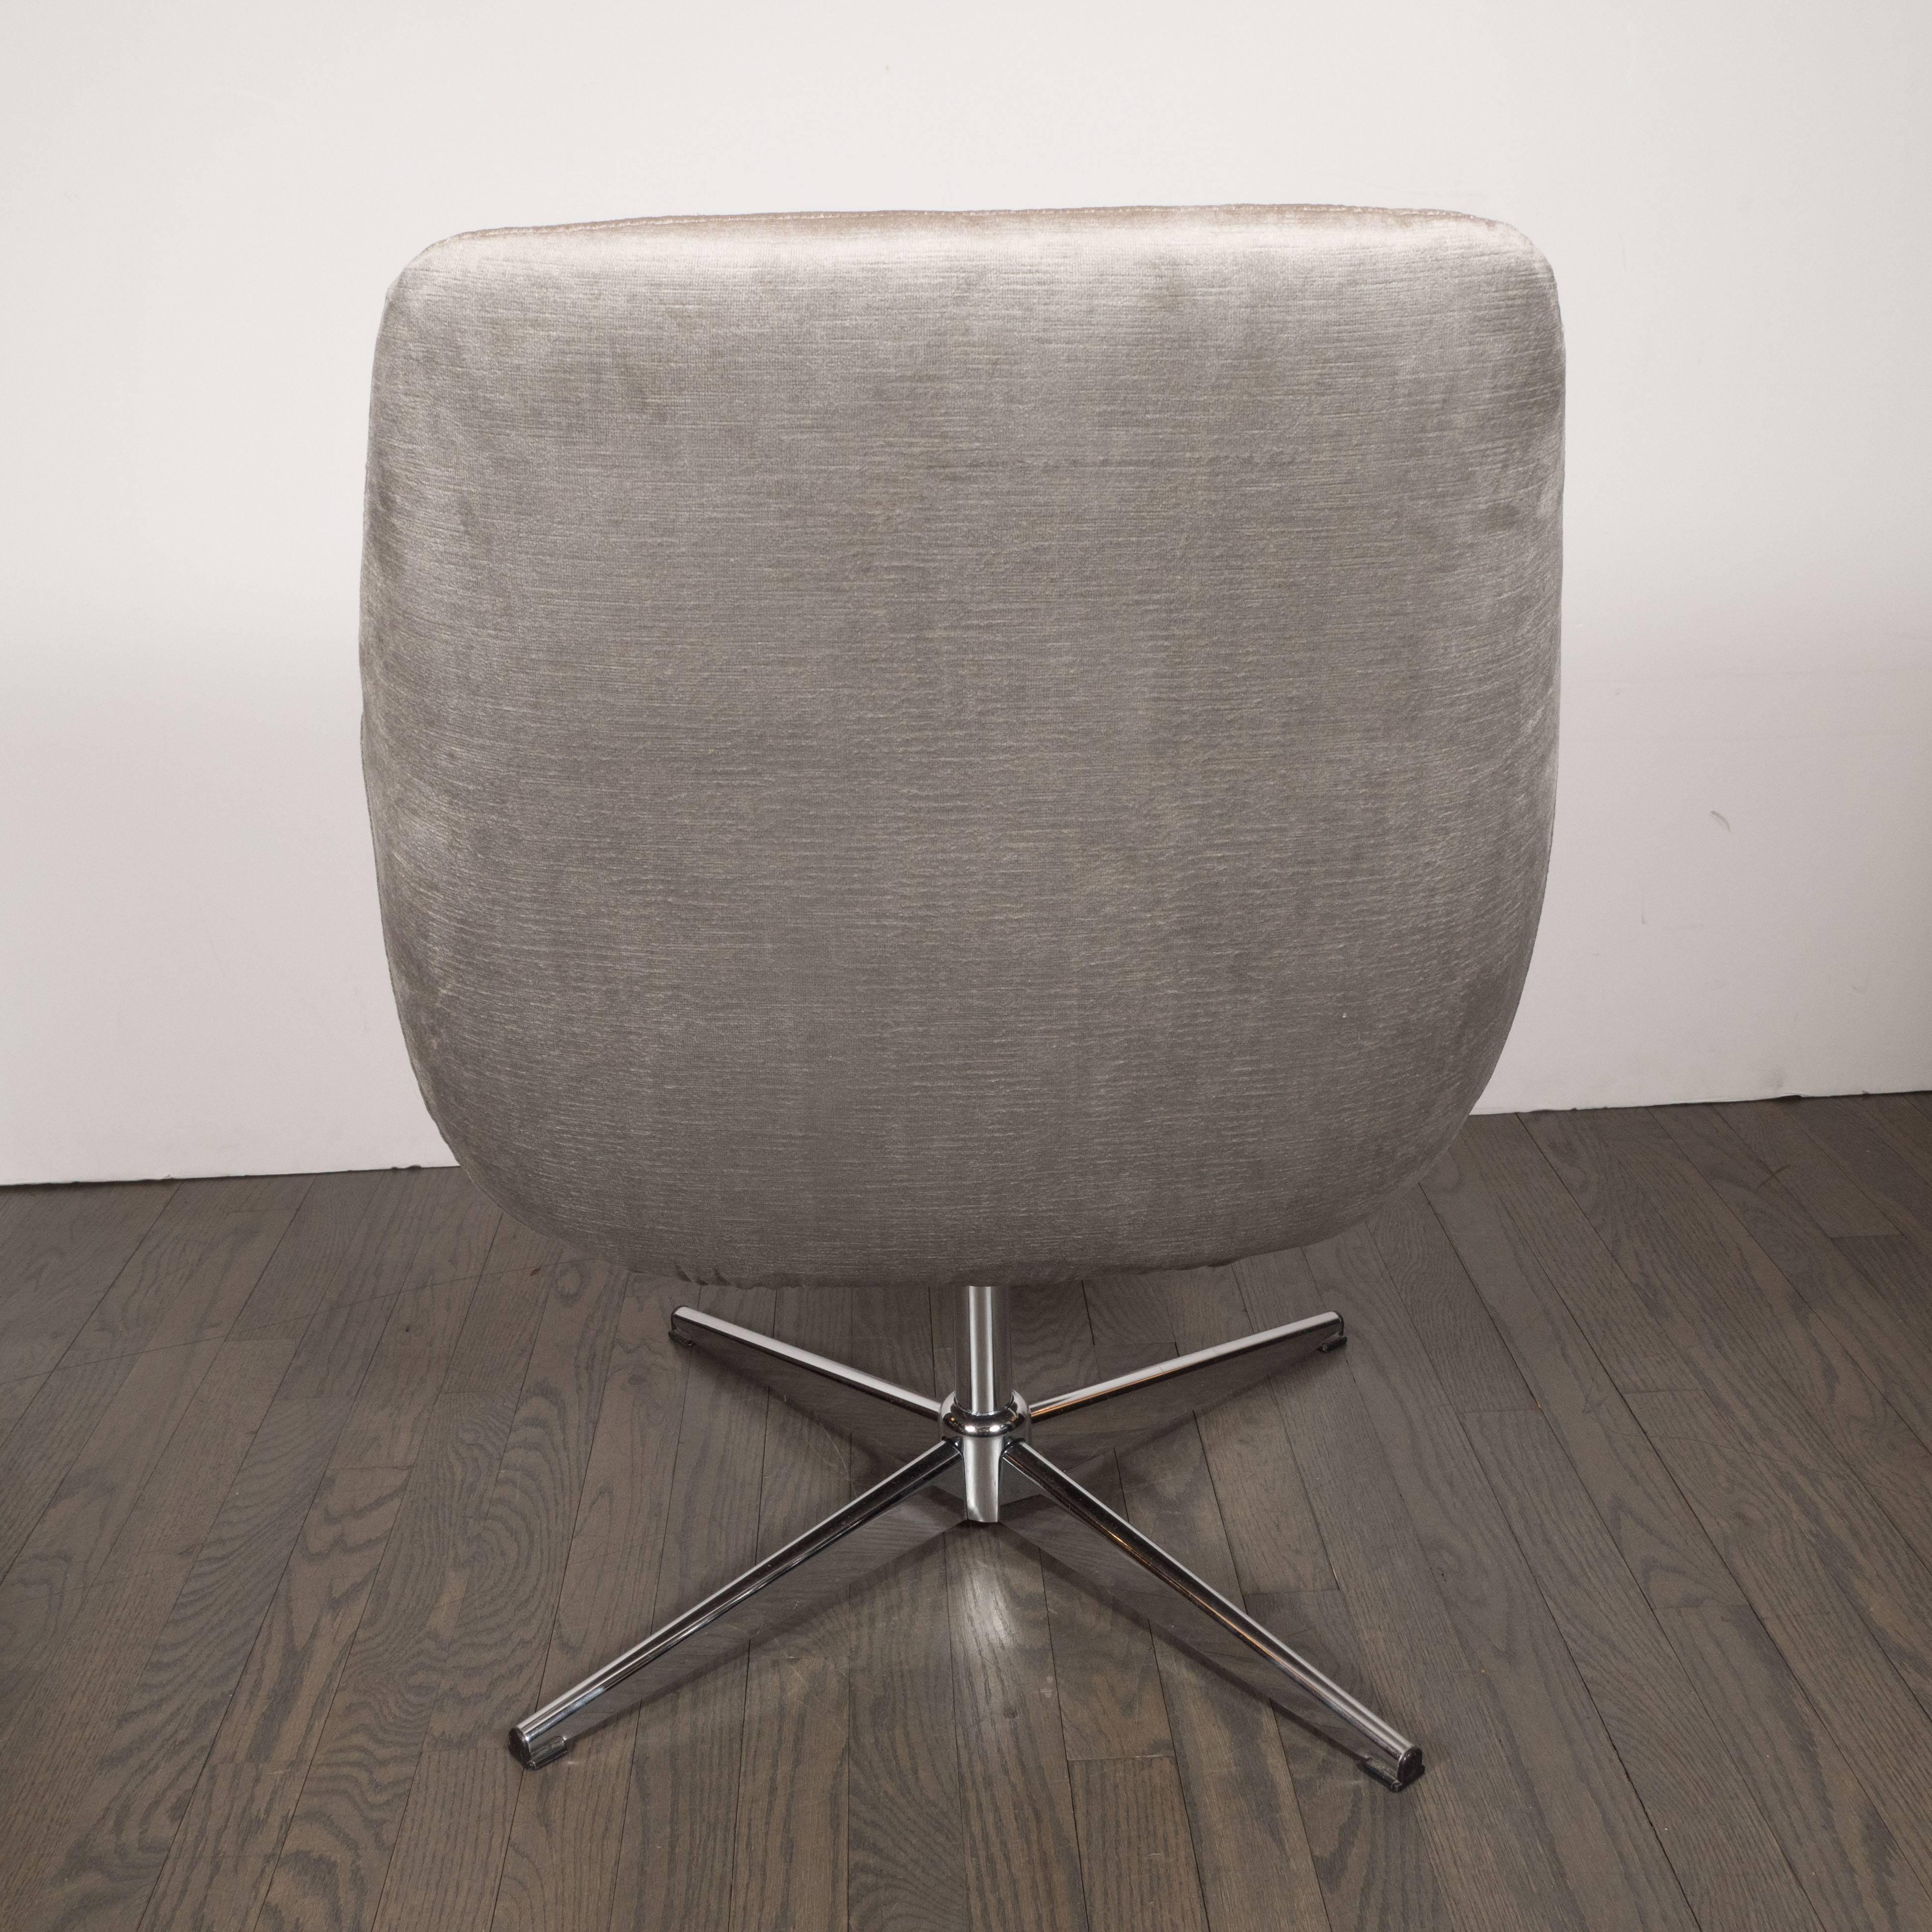 Late 20th Century Pair of Mid-Century Modern Chrome and Smoked Pewter Velvet Swivel Chairs